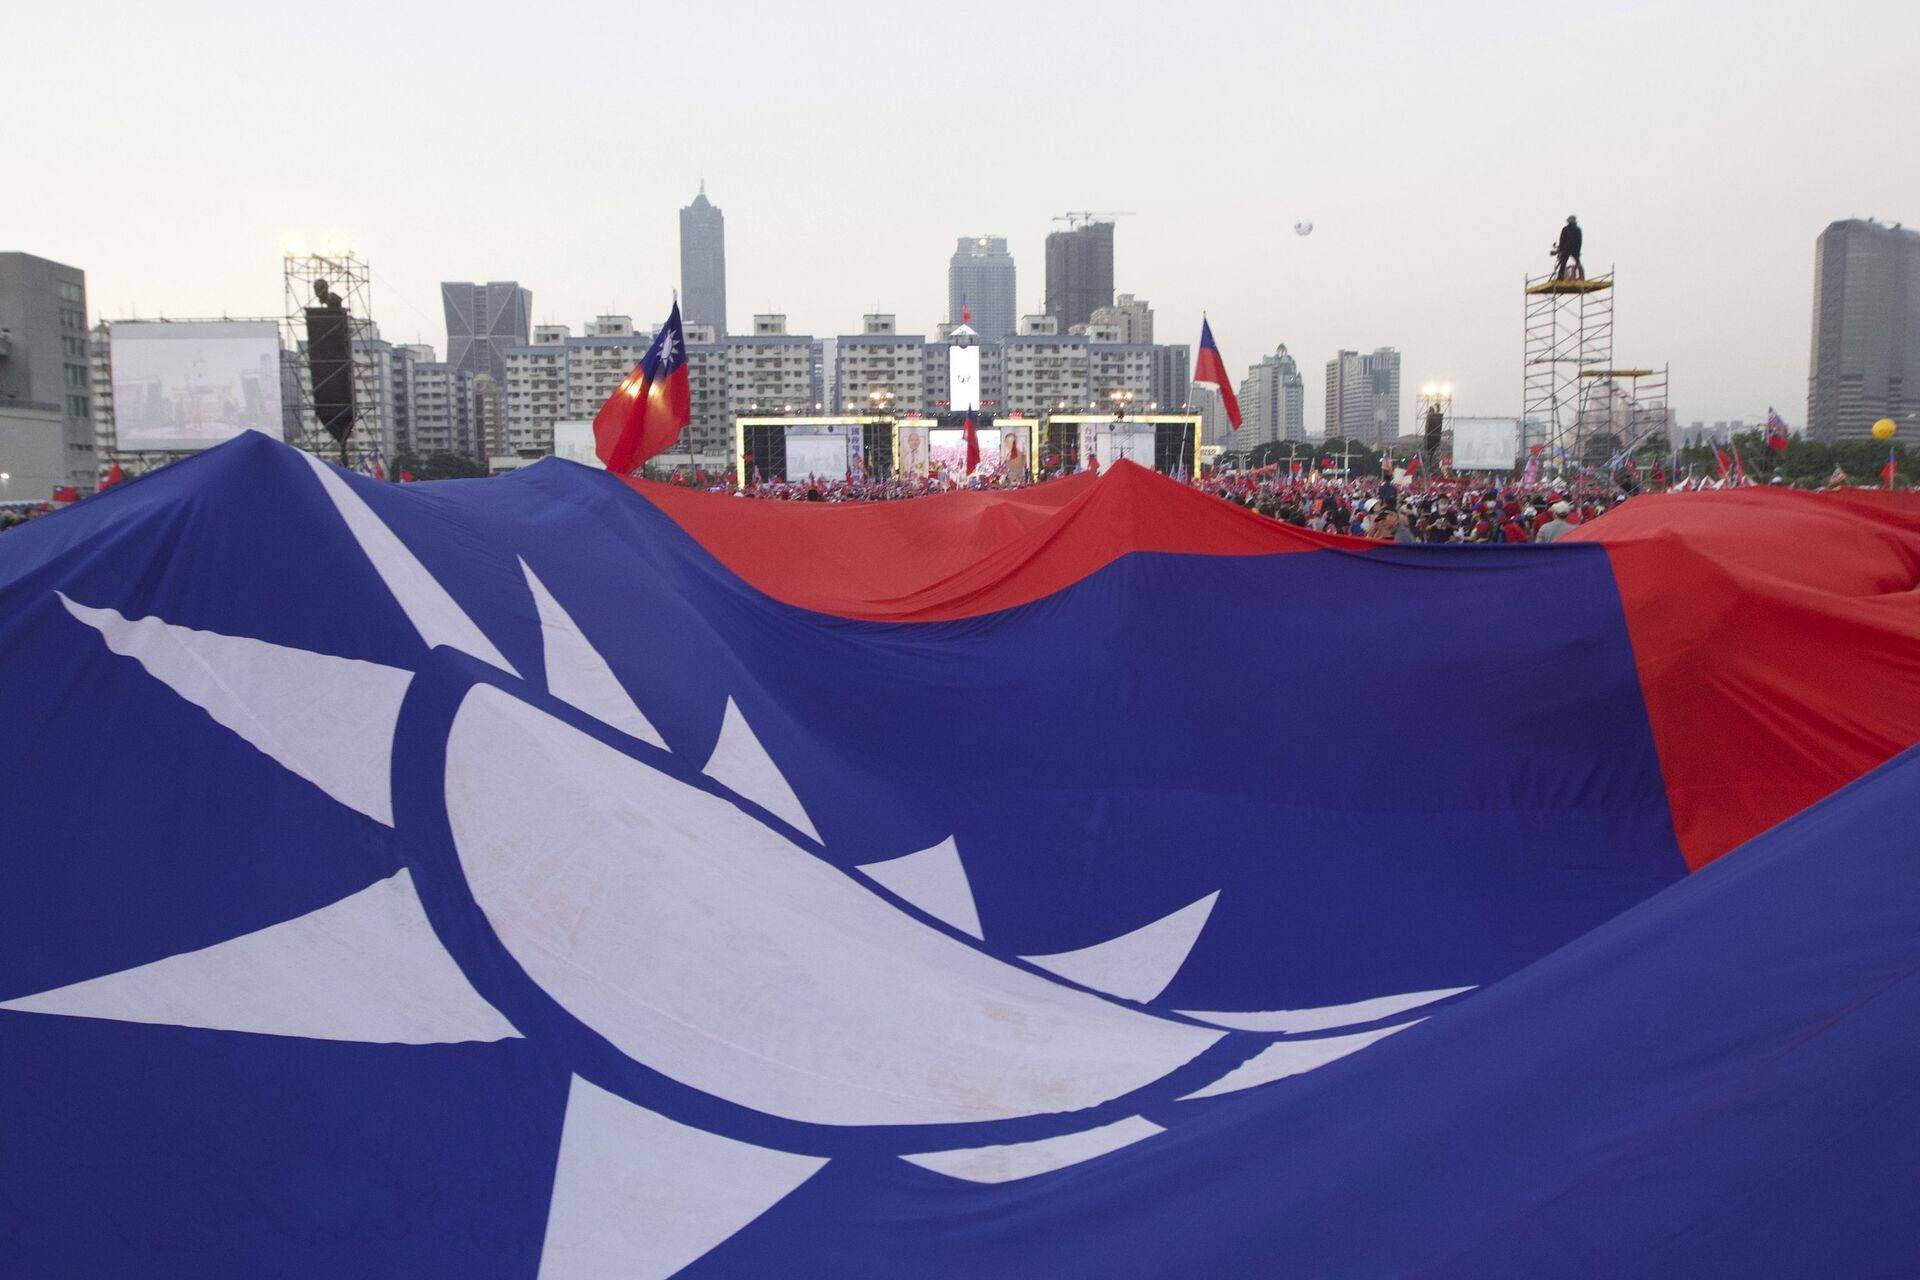 Supporters of Taiwan's 2020 presidential election candidate for the KMT, or Nationalist Party, Han Kuo-yu pass along a giant Taiwanese flag for the start of a campaign rally in southern Taiwan's Kaohsiung city on Friday, Jan 10, 2020 - Sputnik International, 1920, 20.10.2022